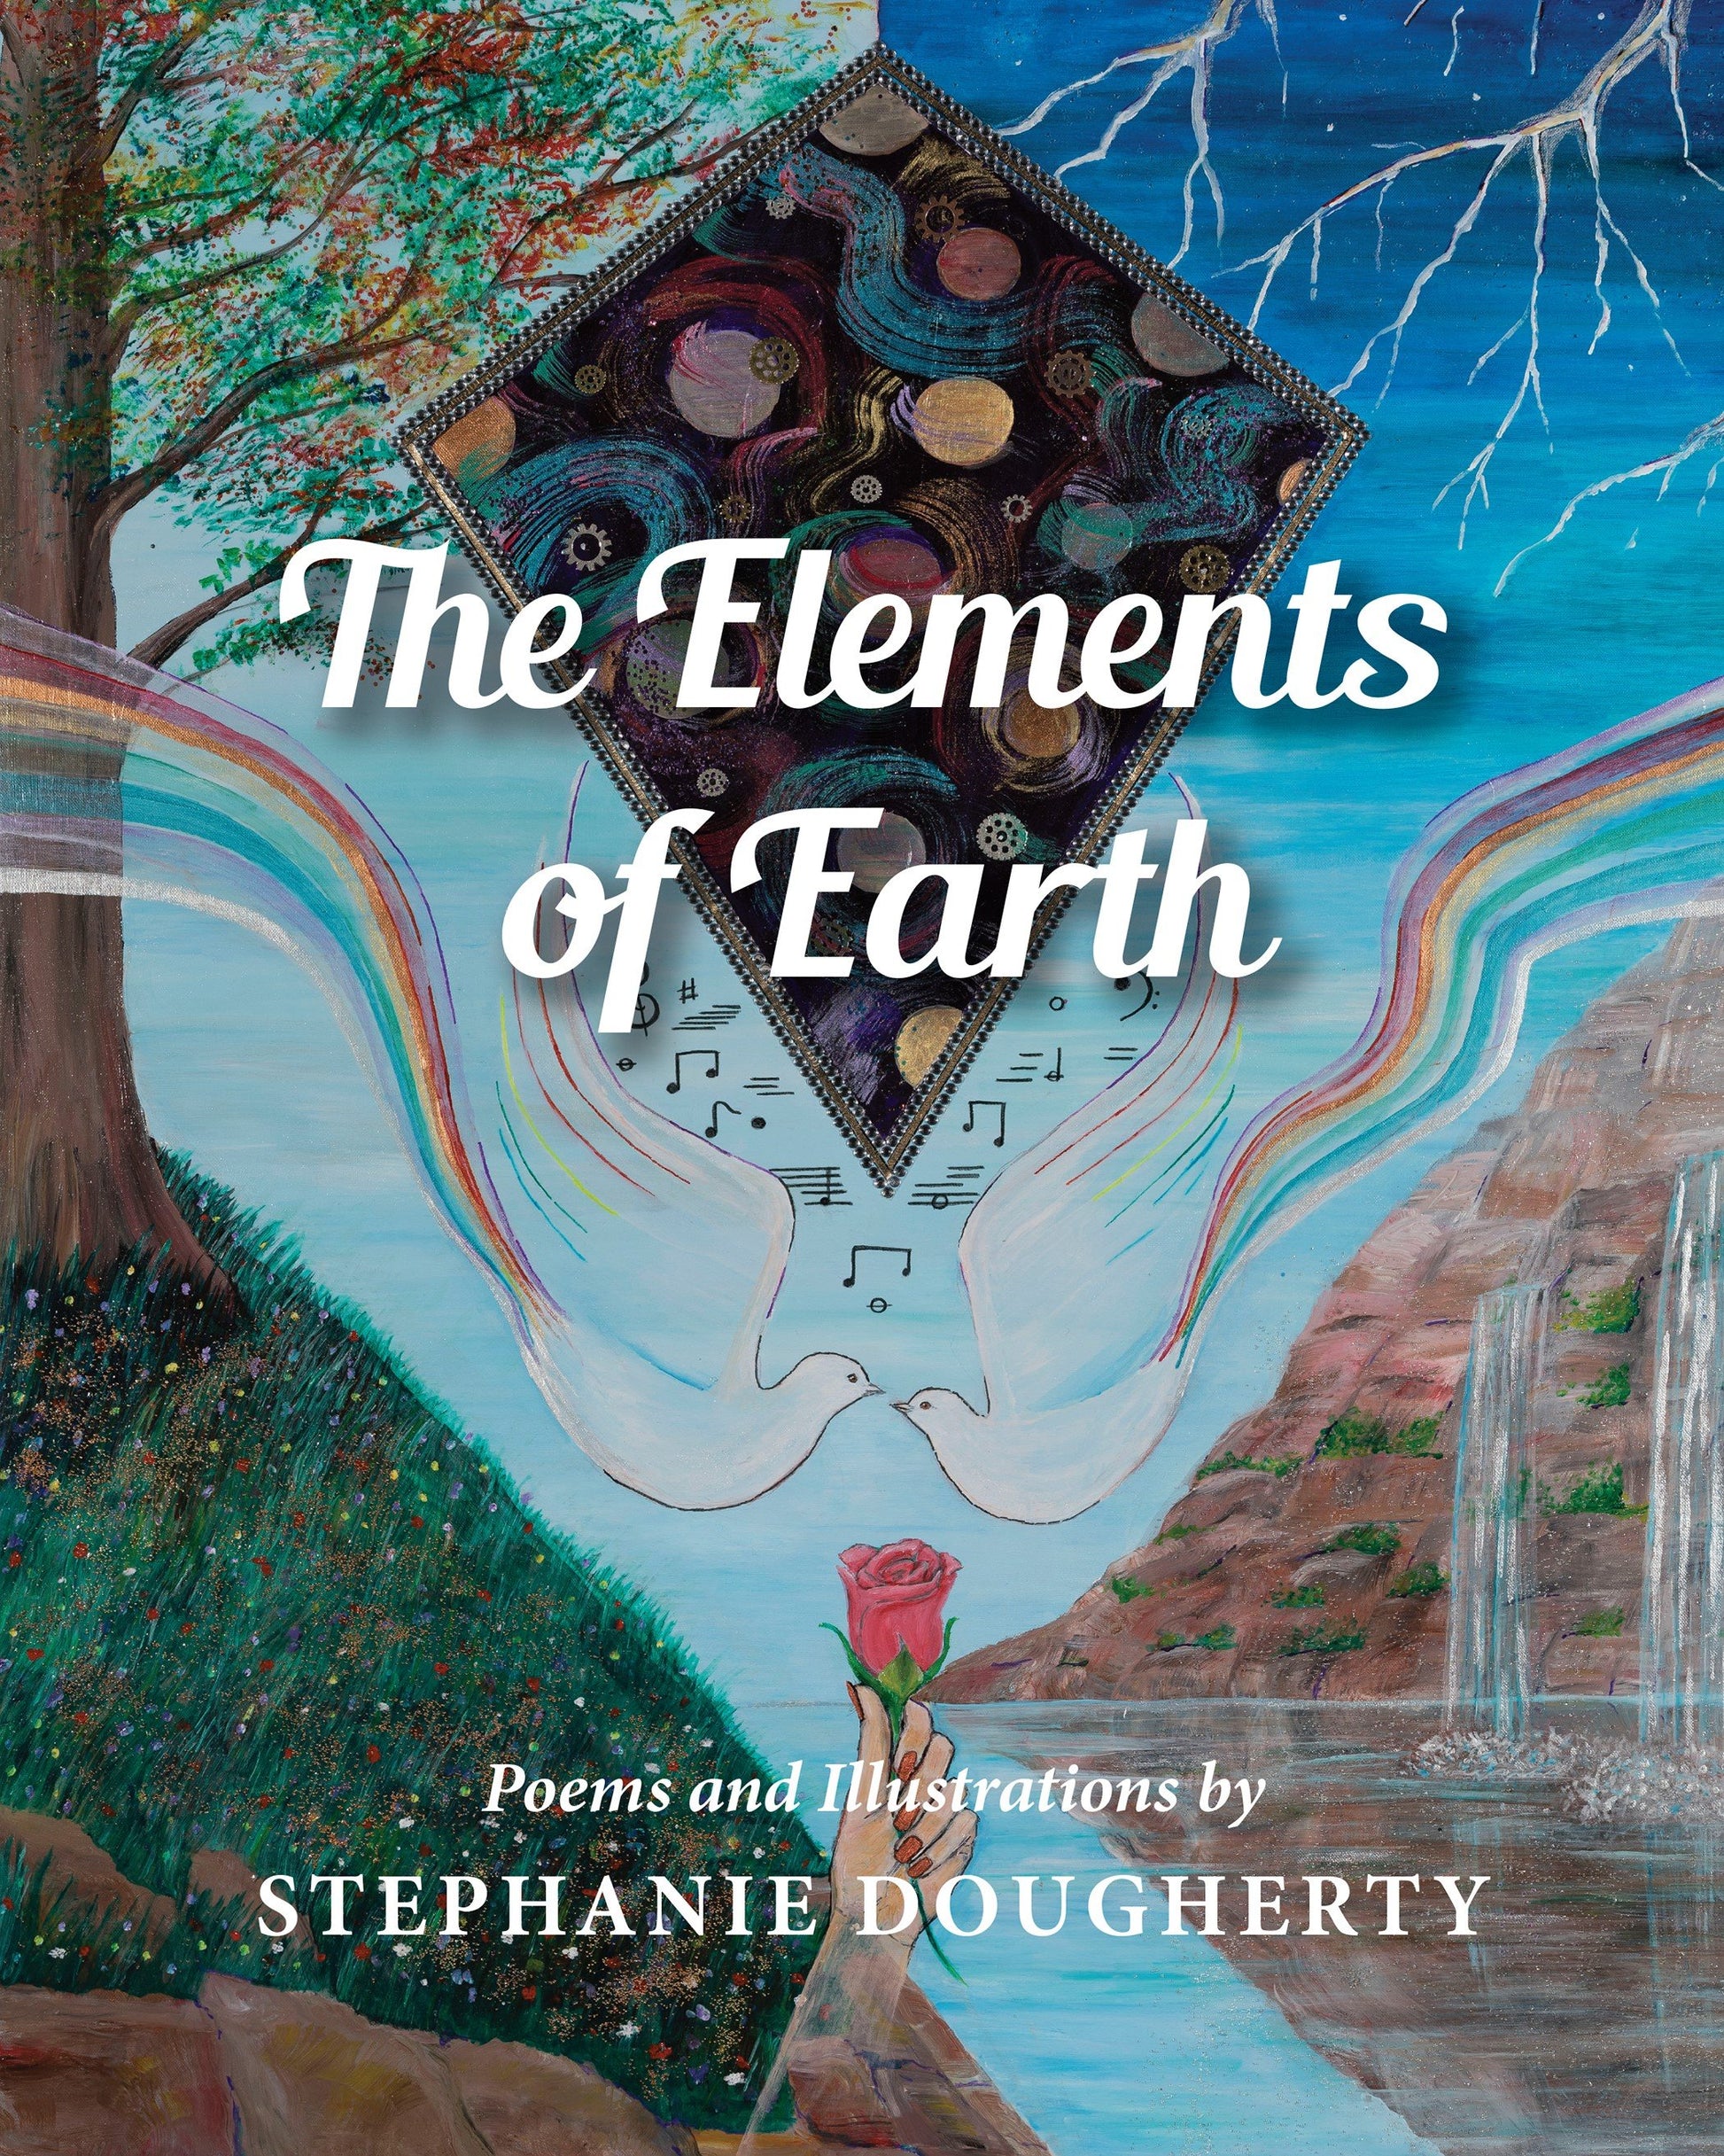 The Elements of Earth: Poems and Illustrations by Stephanie Dougherty